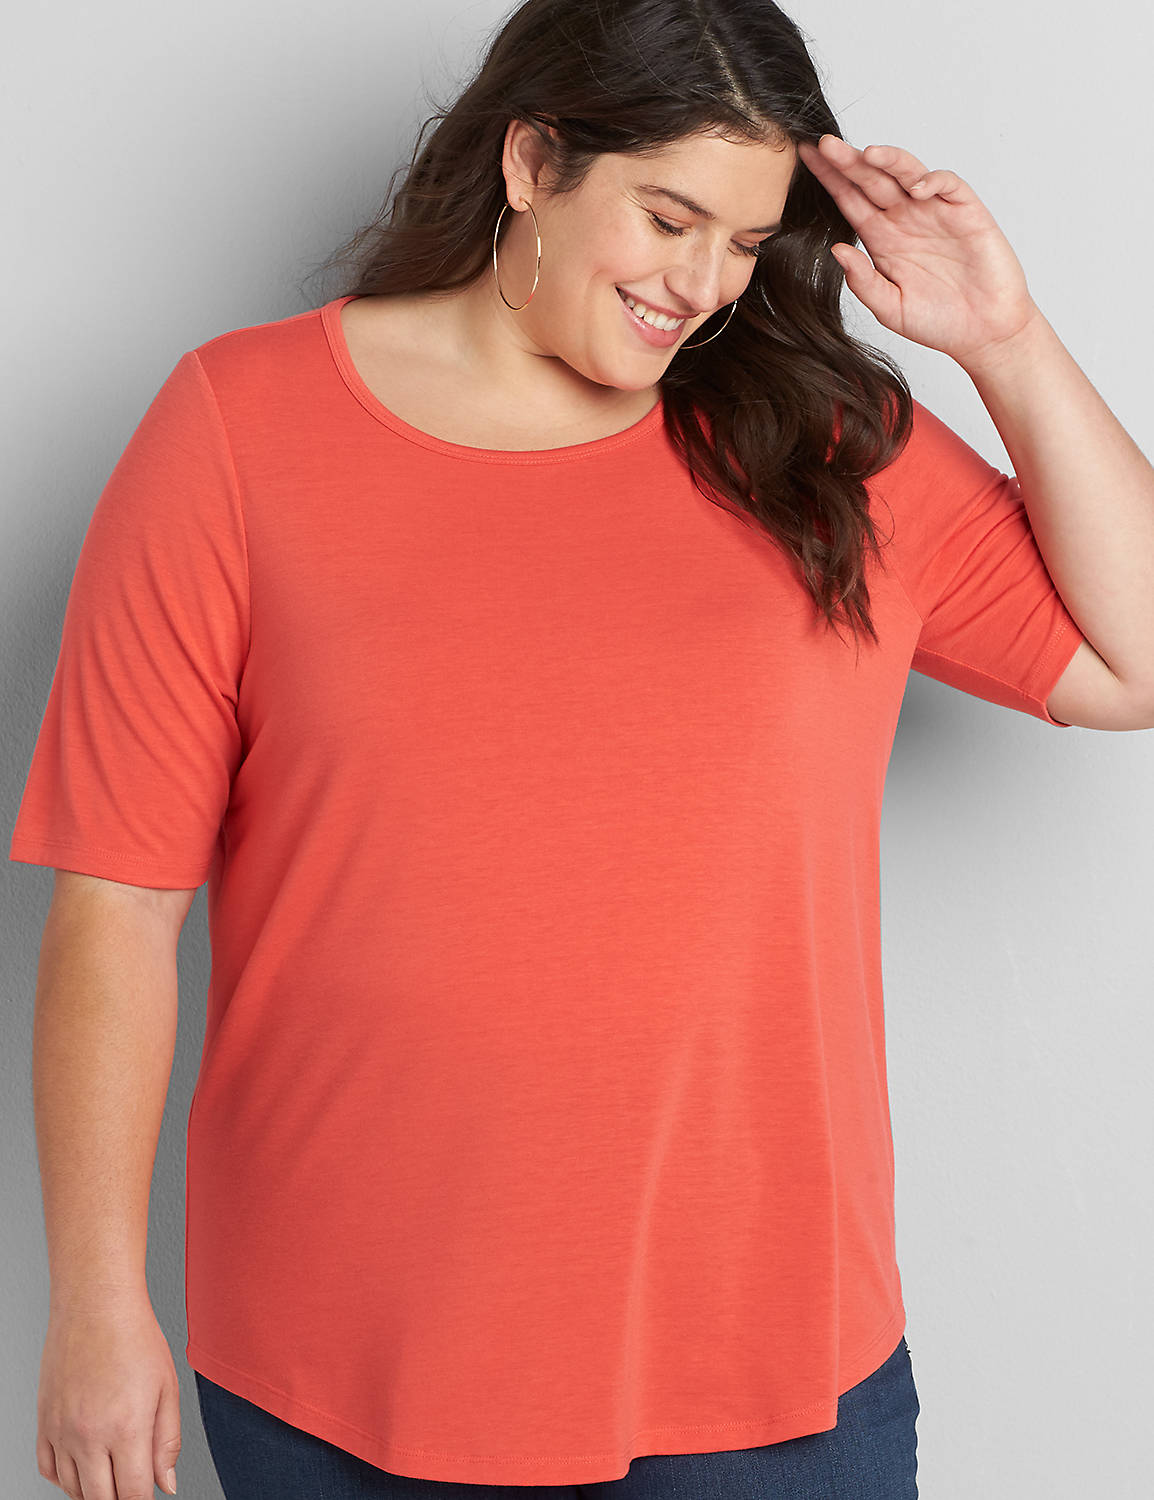 Perfect Sleeve Open Crew Neck Curved Hem Tee 1118446:Starfish Coral CSI 0301184:26/28 Product Image 1